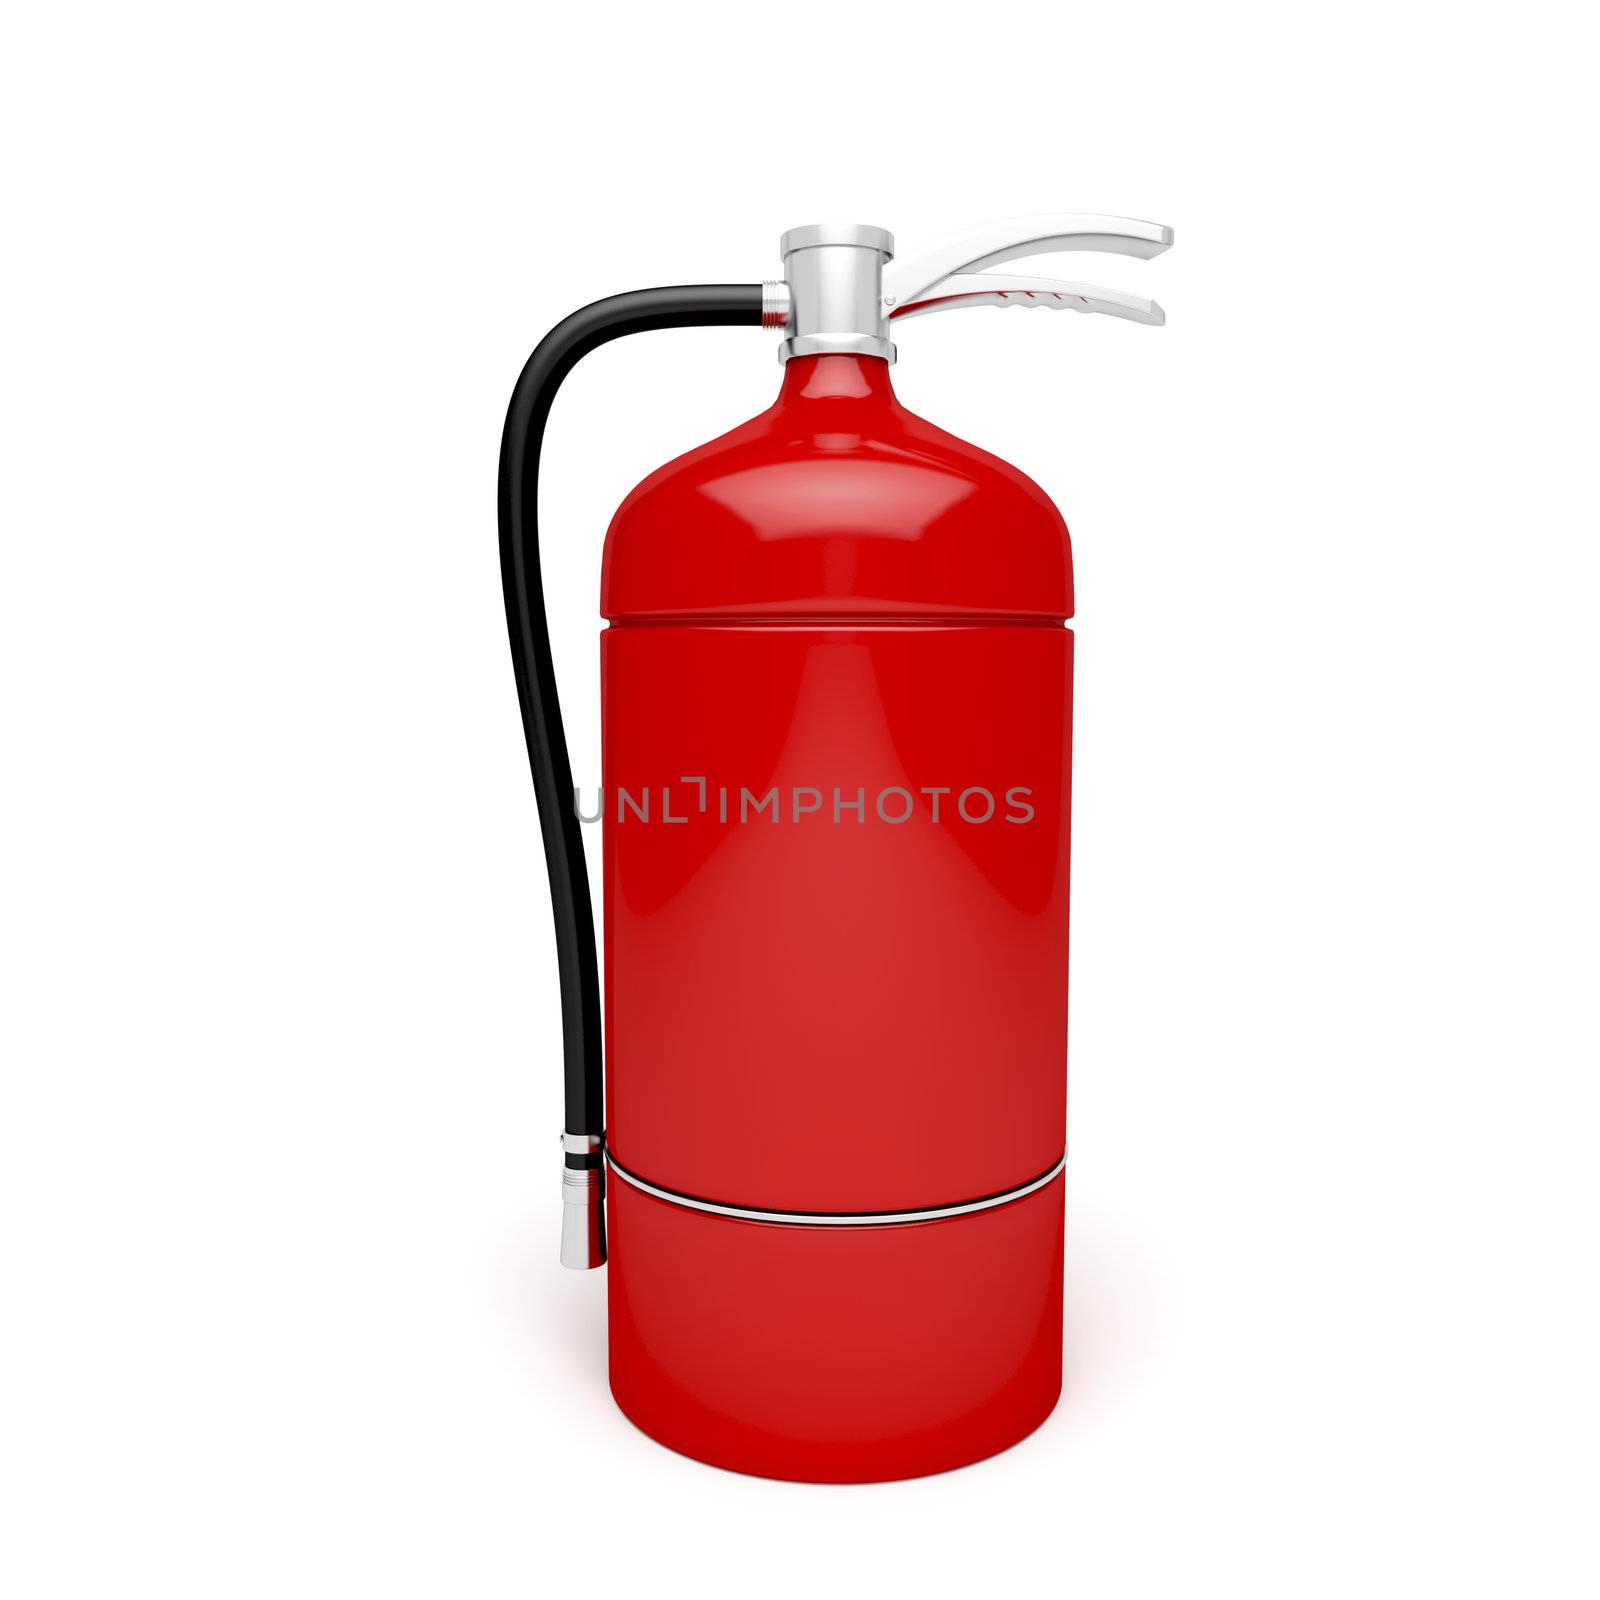 Fire extinguisher by magraphics